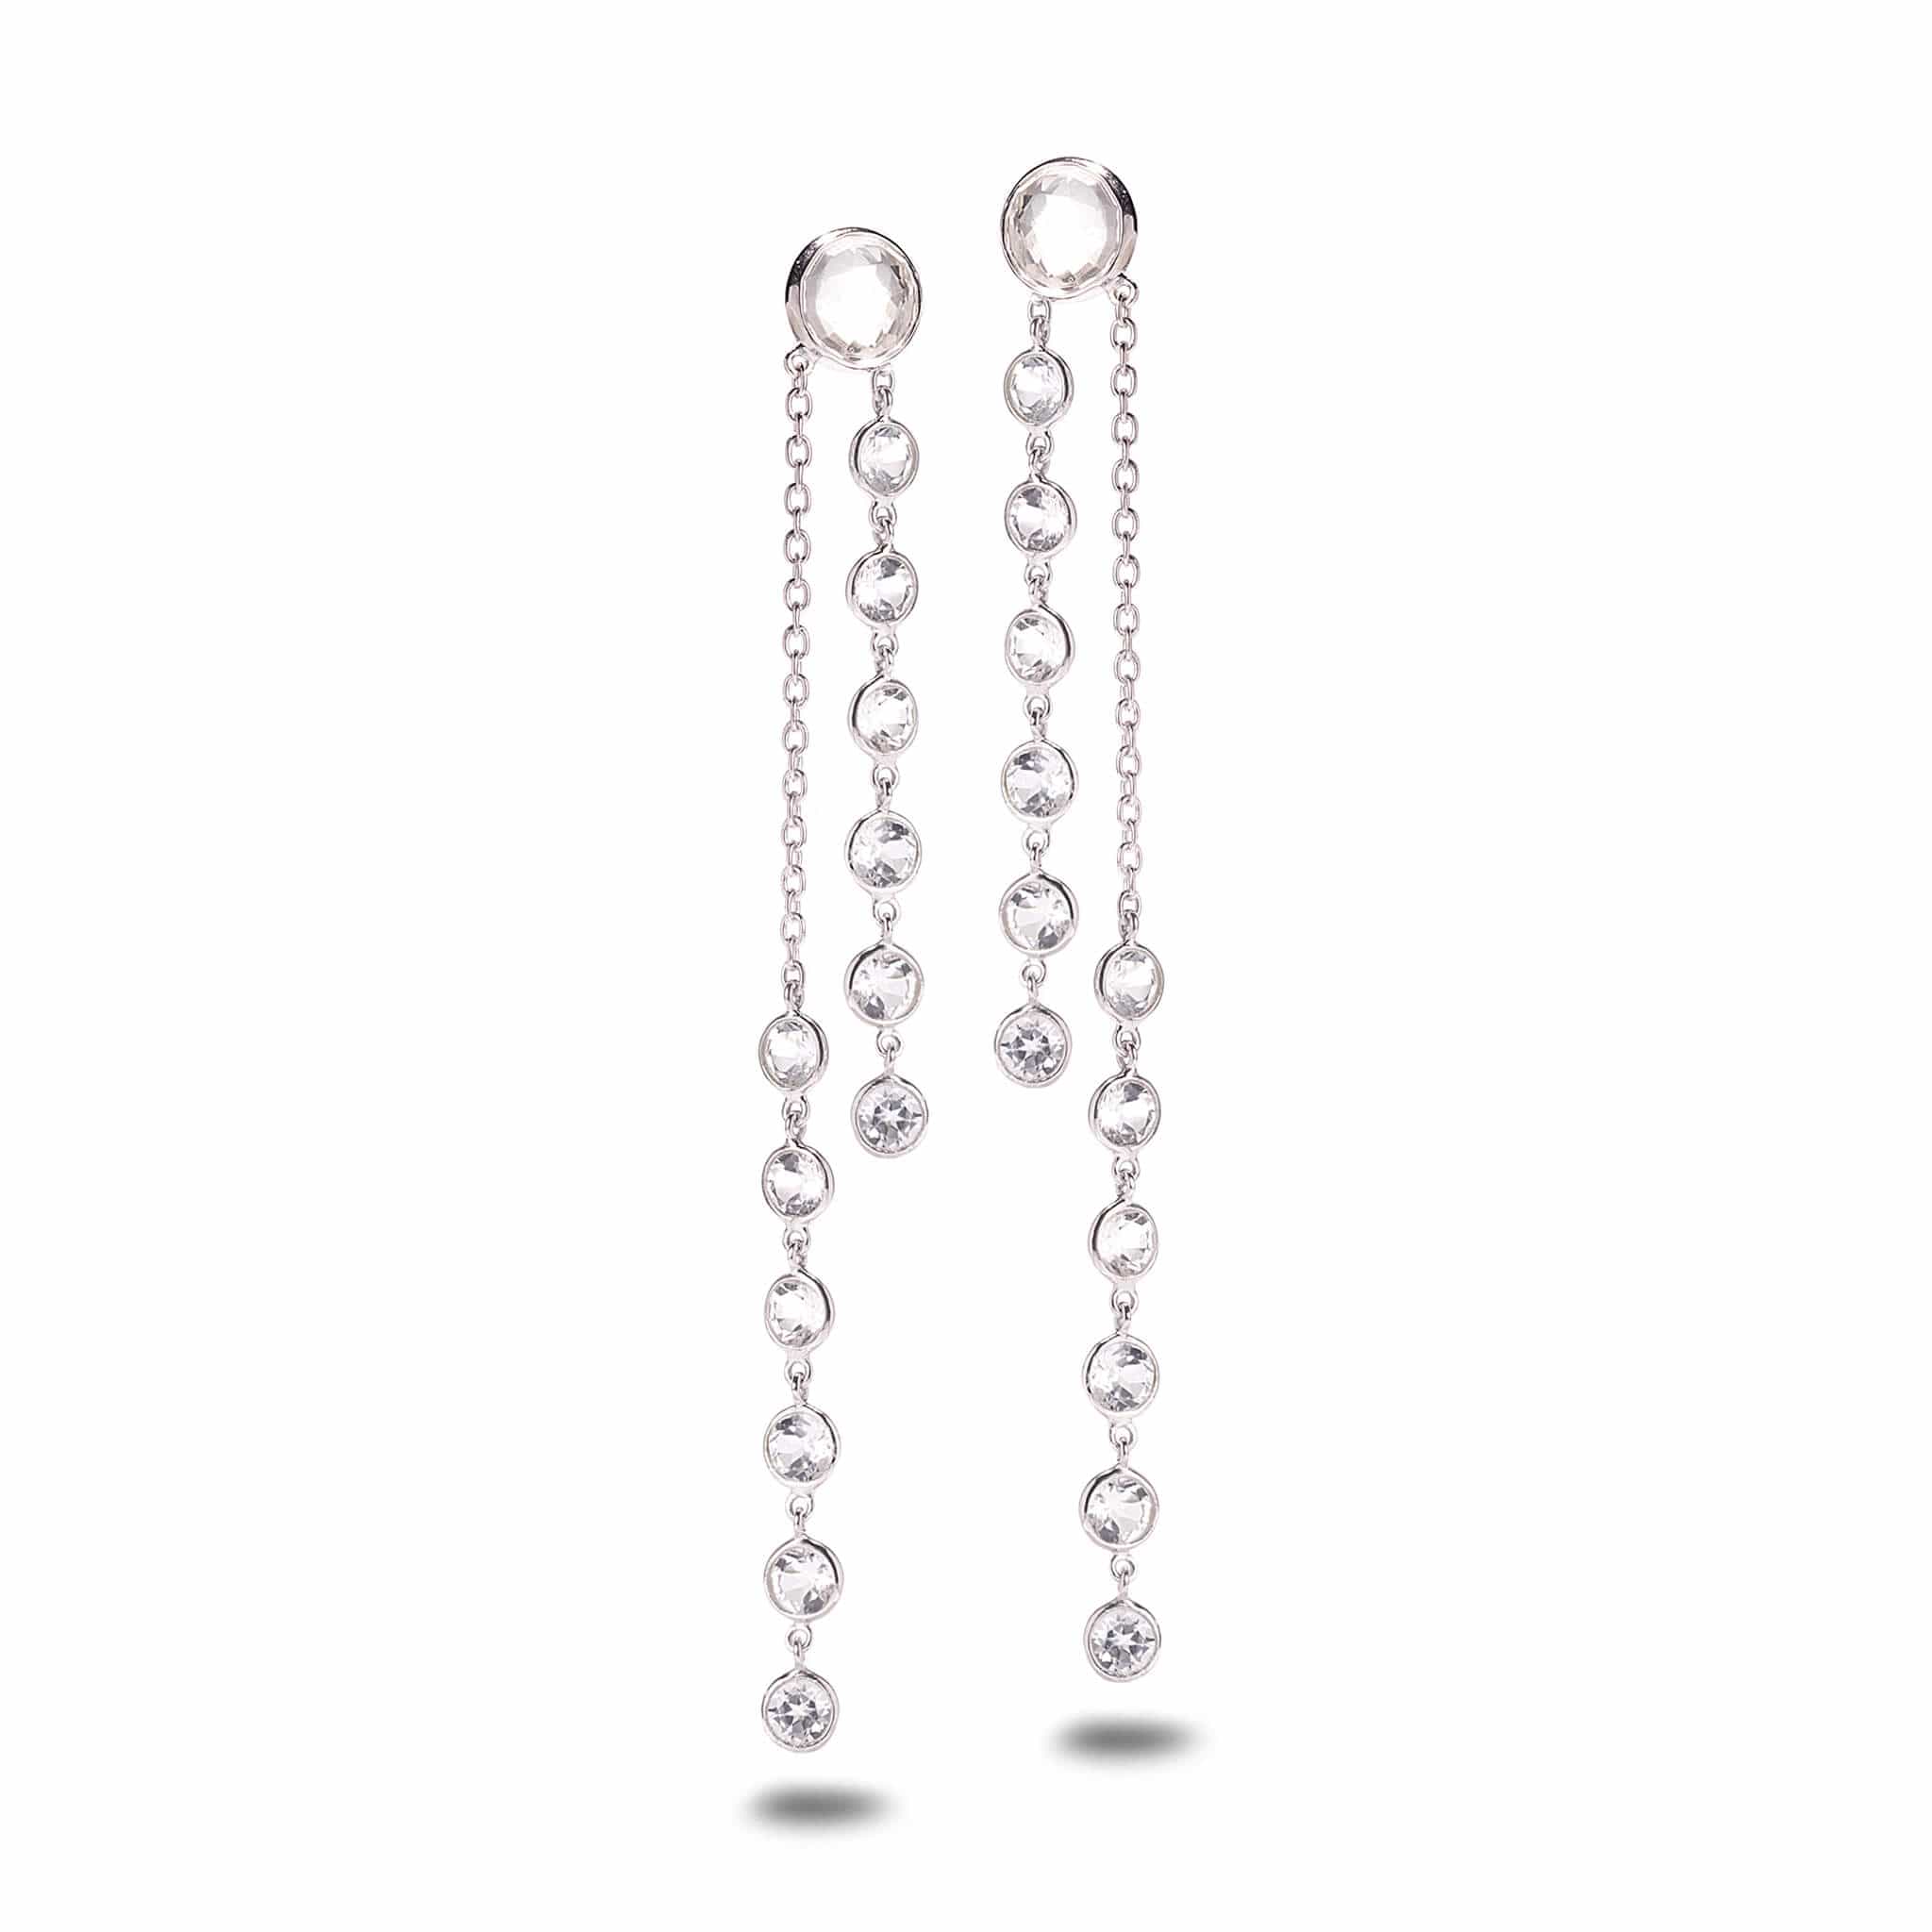 Sterling Silver White Topaz and Crystal Duster Earrings - Coomi